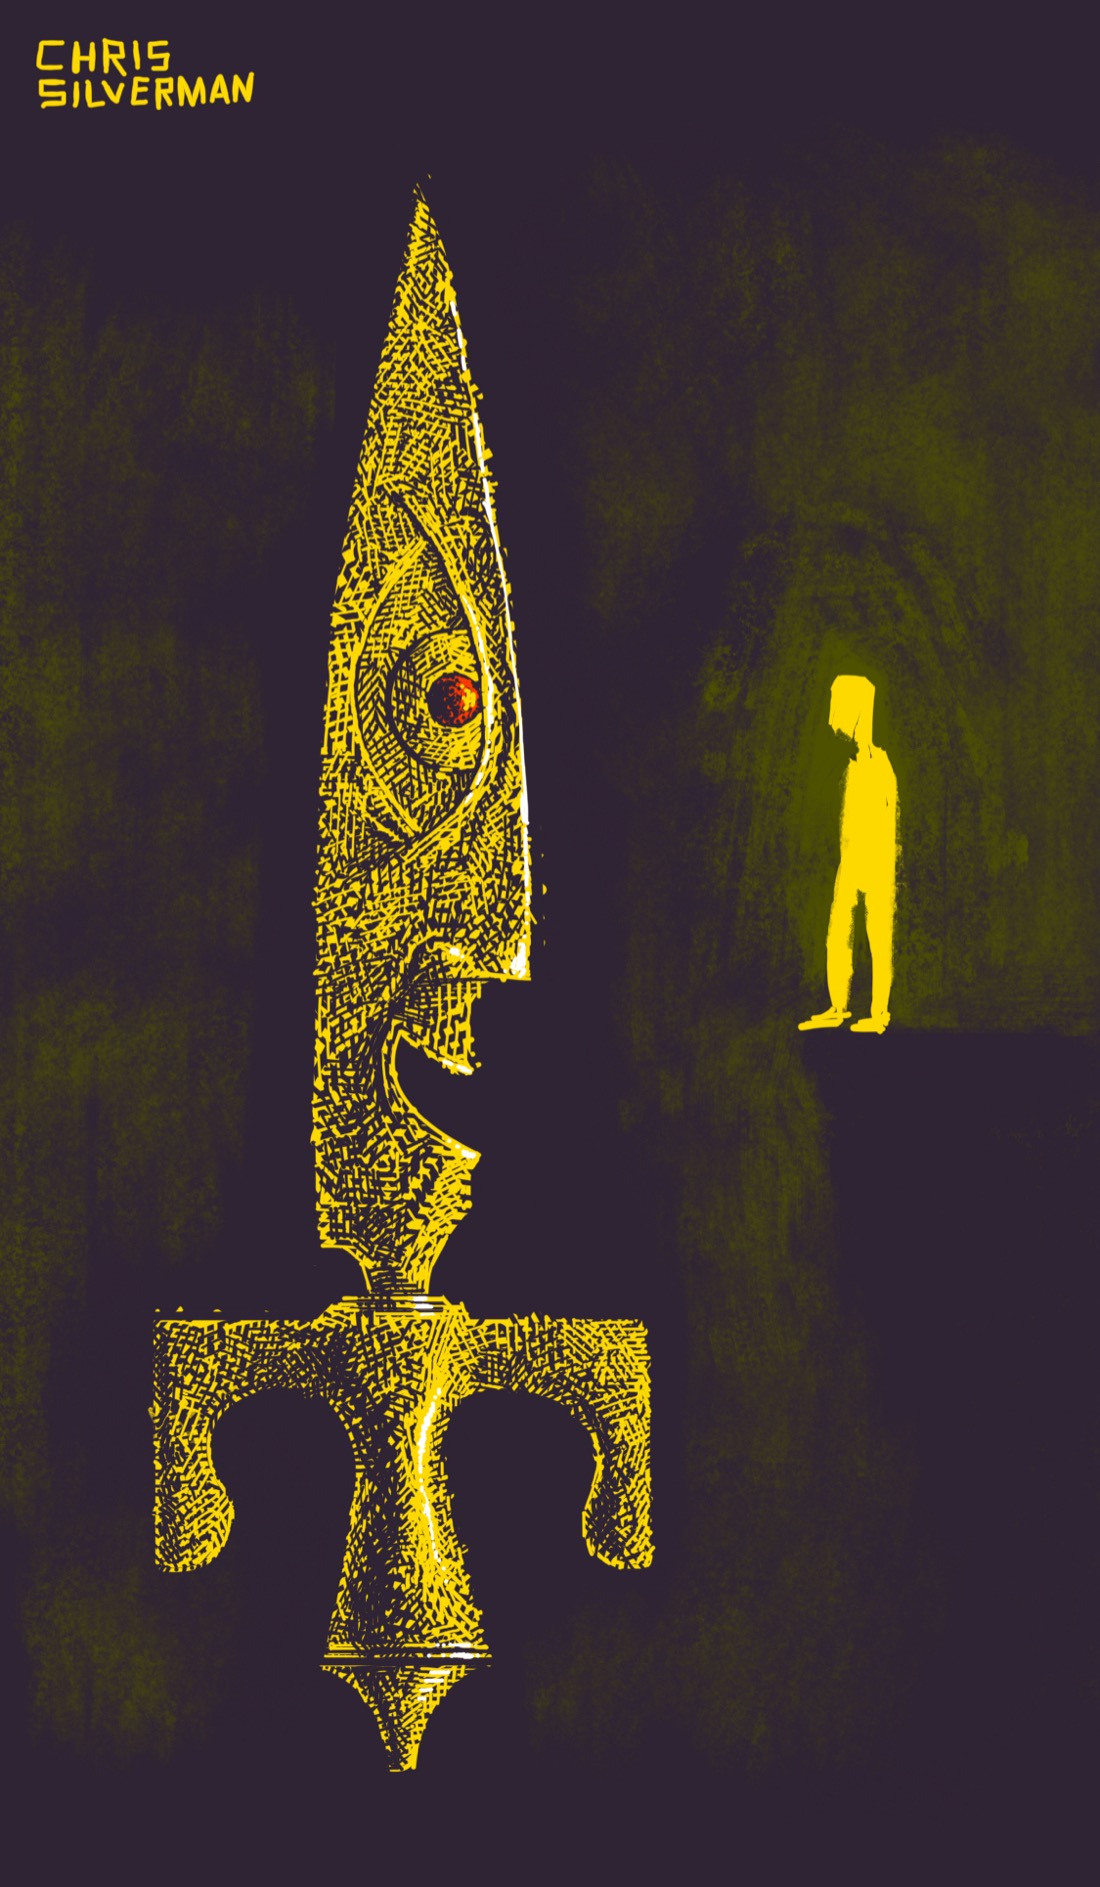 A gold sword or dagger stands, or perhaps hovers, point-up in a large dark space. The blade has a face in profile, looking to the right. The eye of the face is shaped like a regular human eye, but rotated 90 degrees, and has a red stone set in the pupil. Standing on a ledge at the right is the yellow silhouette of a person. The sword and the person seem to be talking.